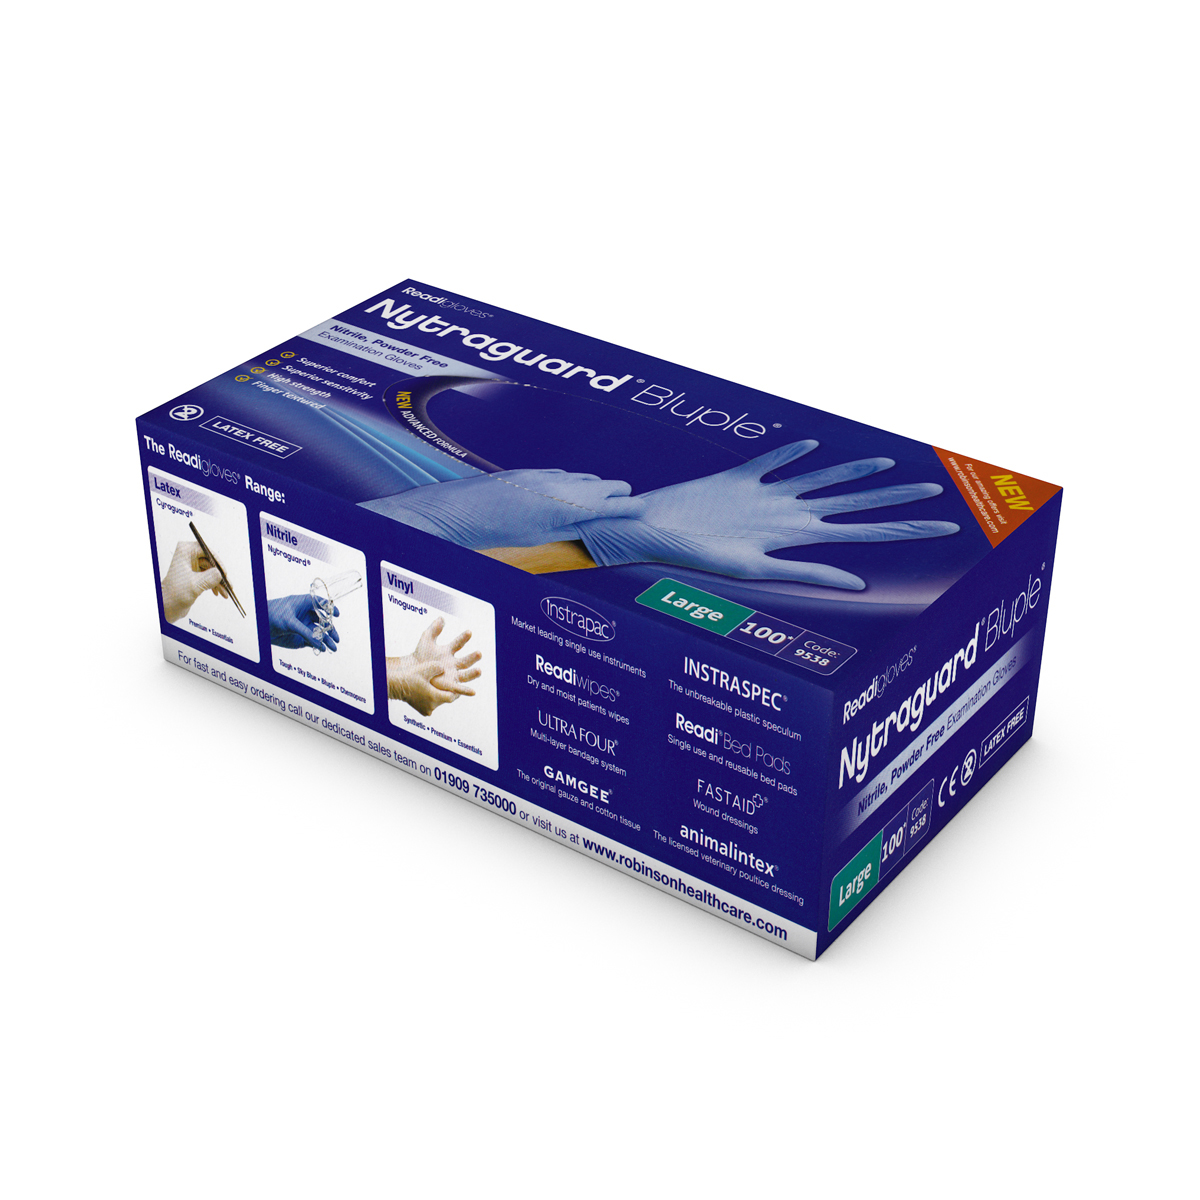 Bluple Nytraguard medical gloves. size: Large. Box of 100 (temp out of stock)